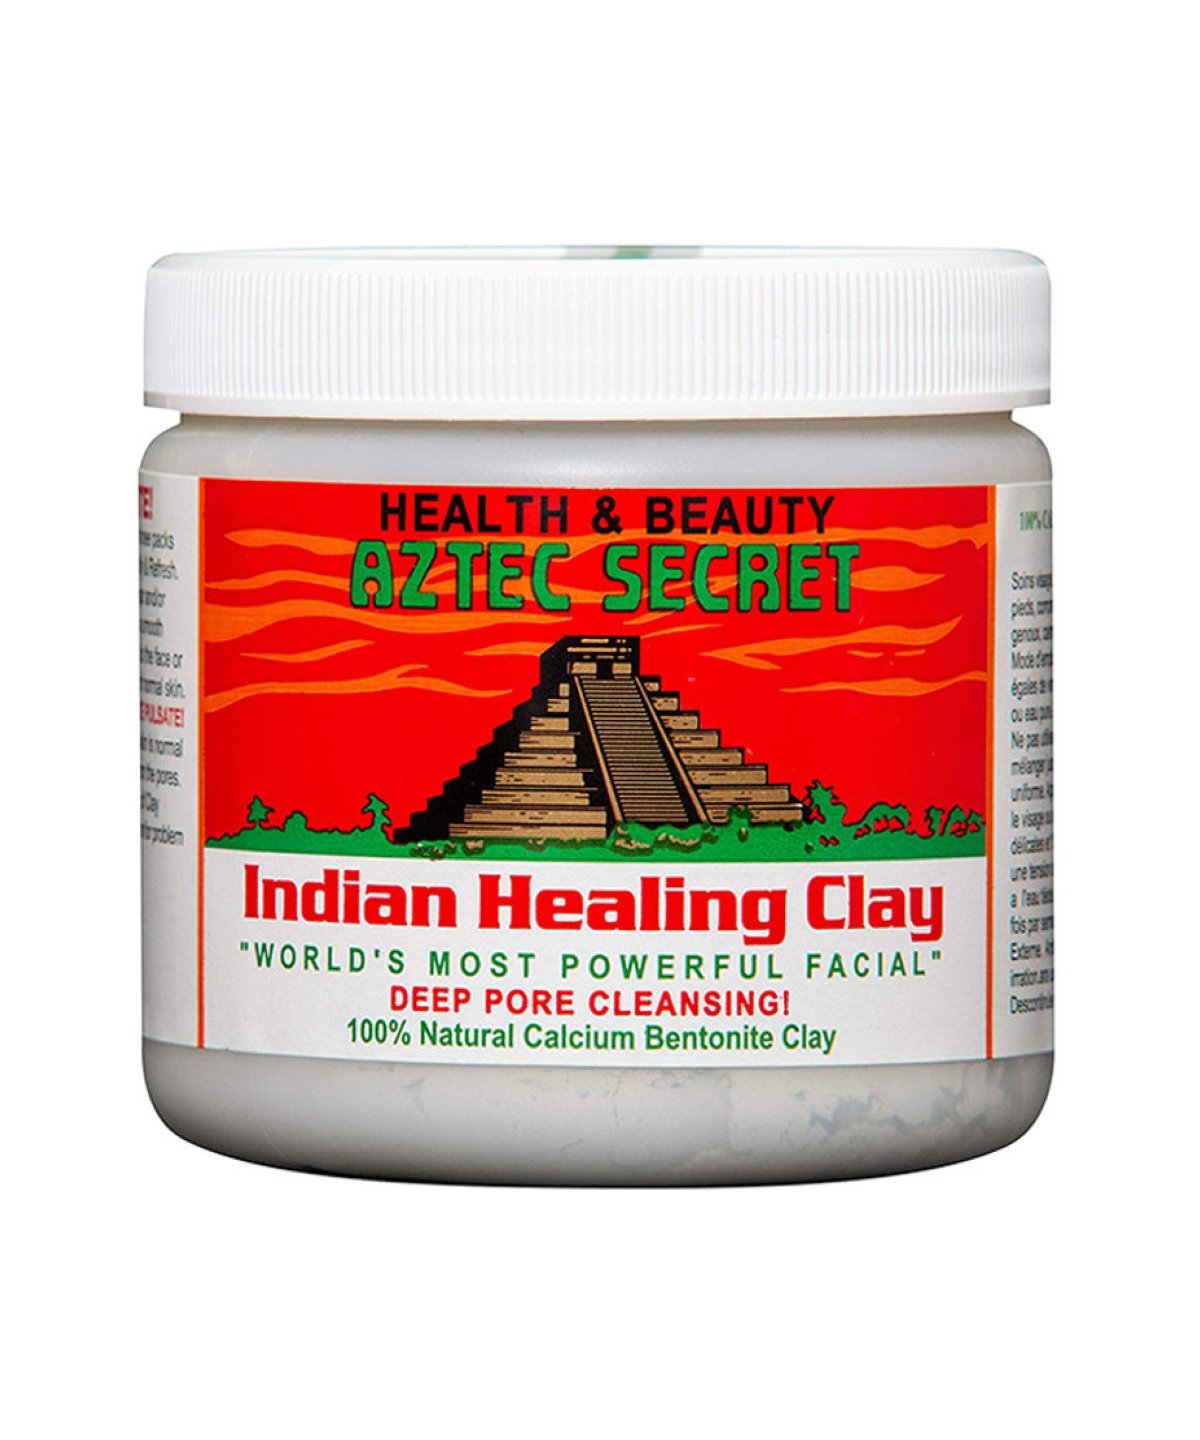 Aztec Secret Indian Healing Clay for deep pore cleansing in Dubai, Abu Dhabi, and all UAE at Shopey